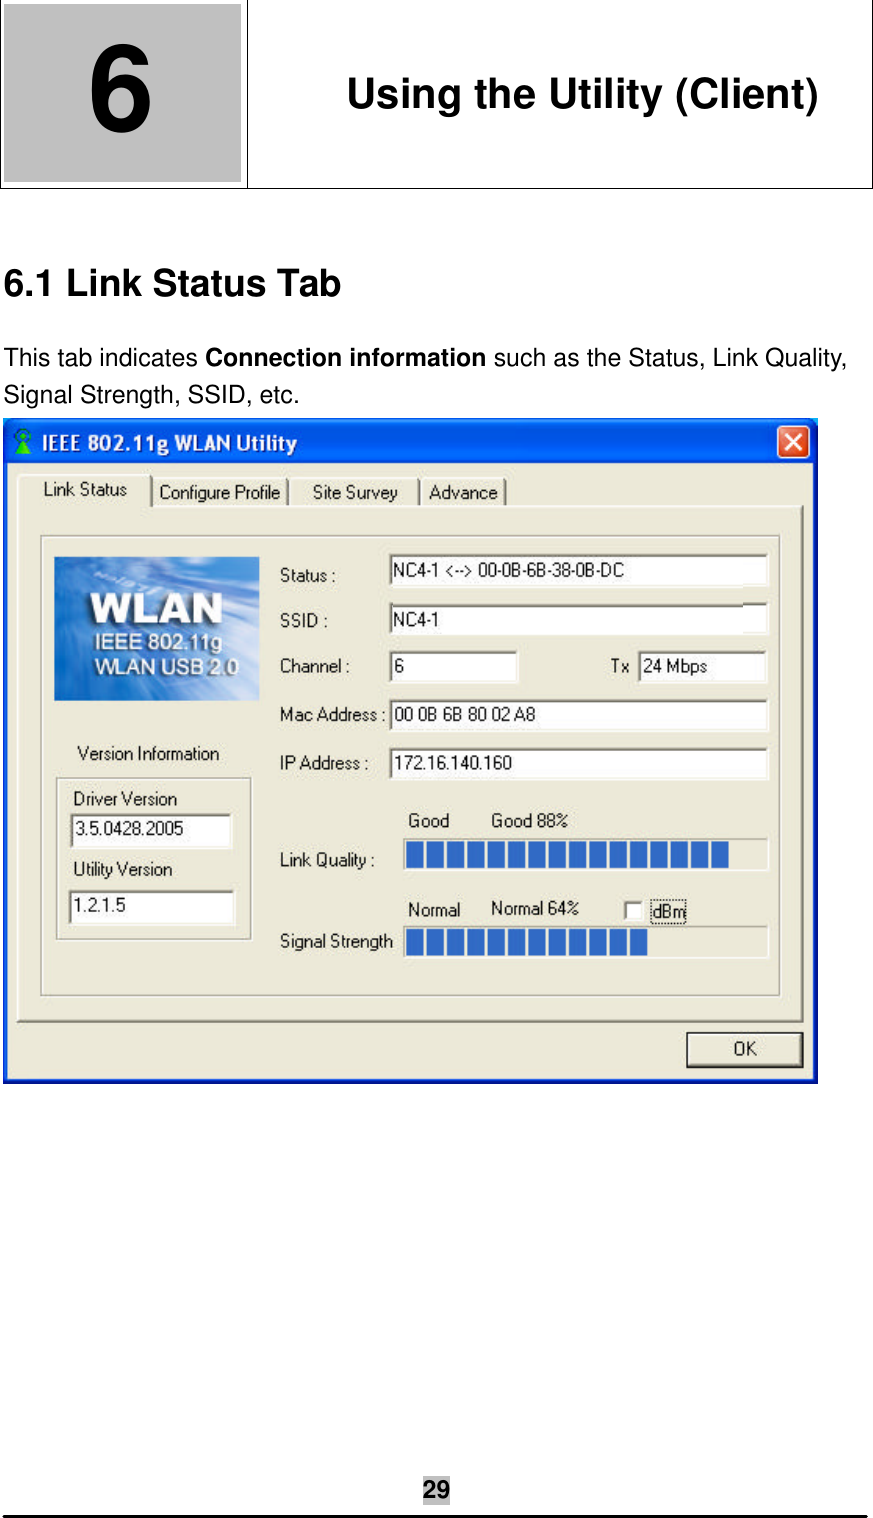   29 6  6. Using the Utility (Client)  6.1 Link Status Tab This tab indicates Connection information such as the Status, Link Quality, Signal Strength, SSID, etc.   